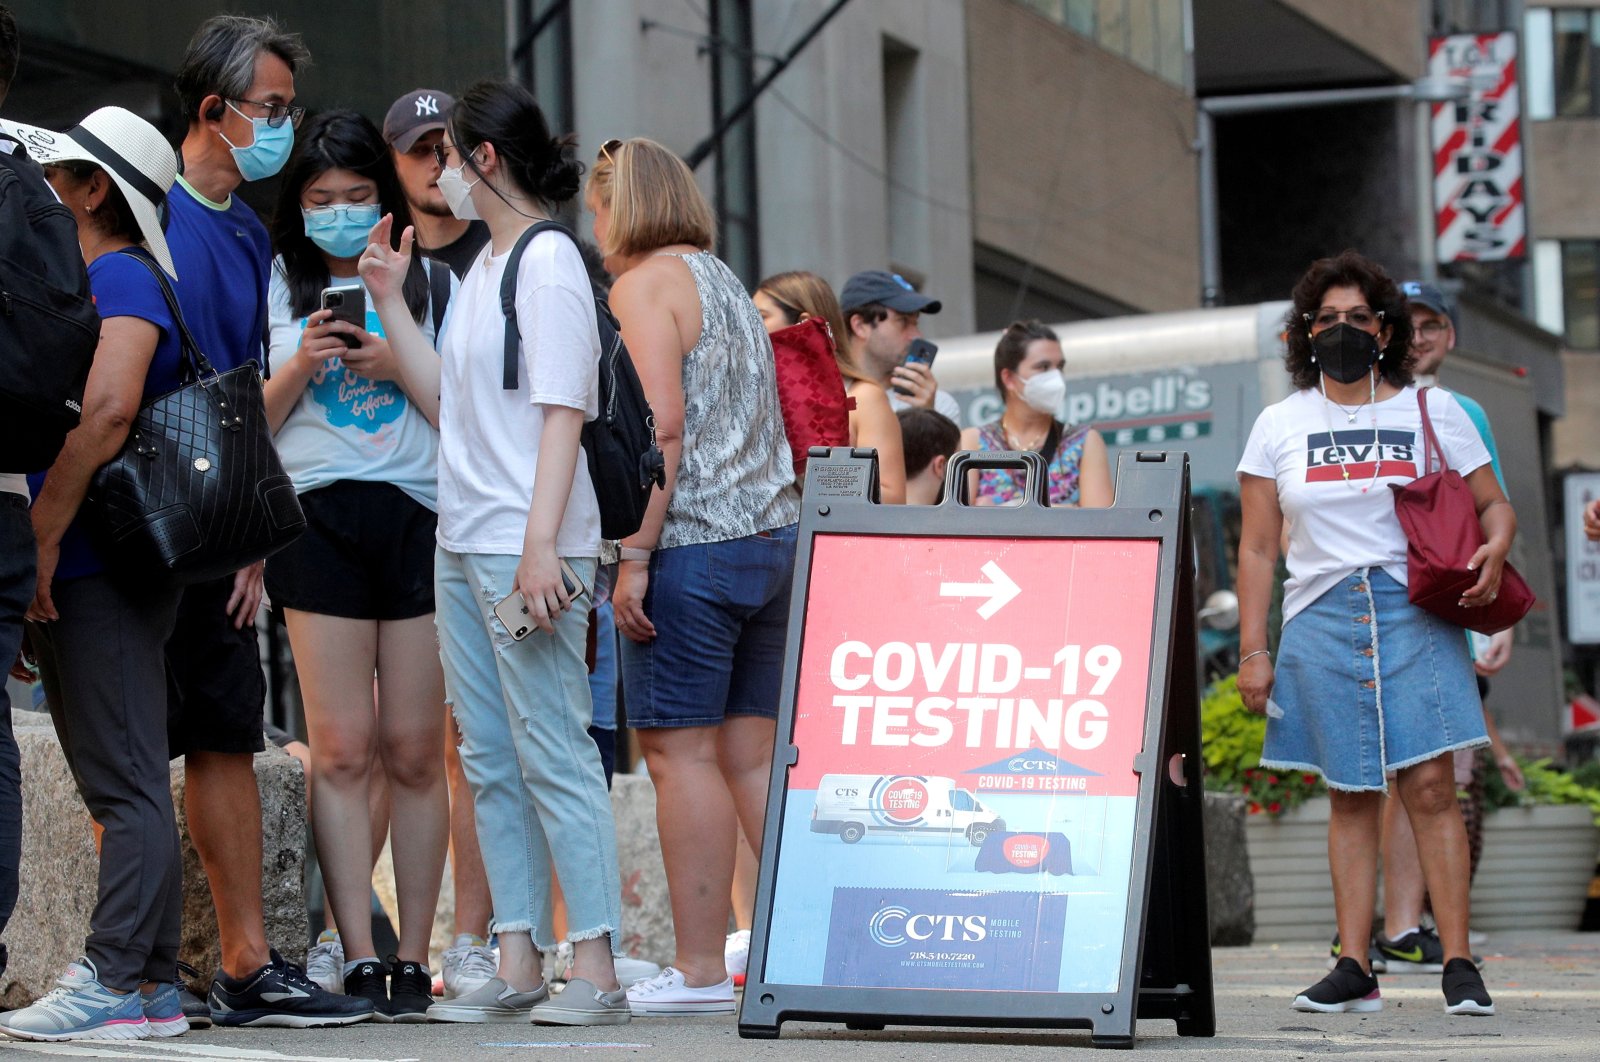 People line up for COVID-19 testing at a mobile testing van in New York City, U.S., Aug. 27, 2021. (Reuters Photo)